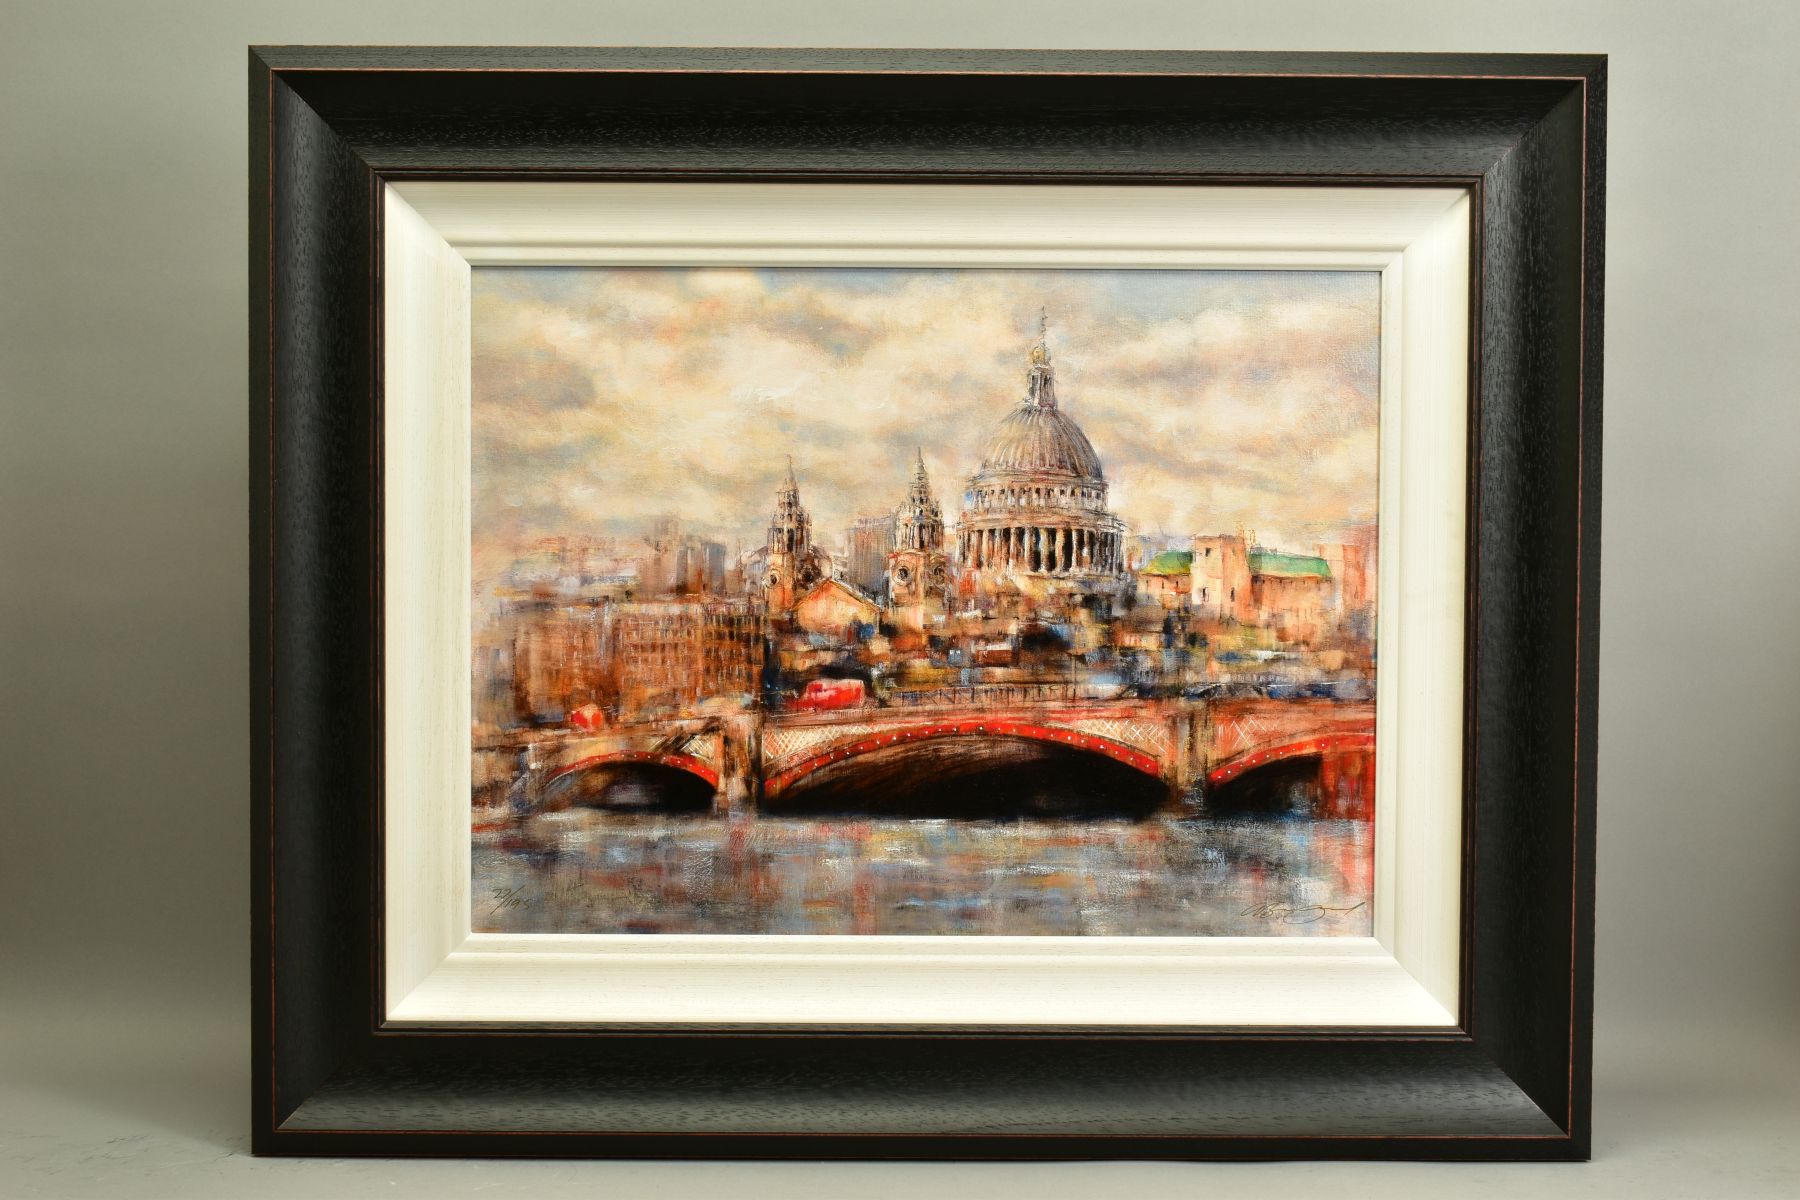 GARY BENFIELD (BRITISH 1965), 'St Pauls', a Limited Edition print of a London skyline, 27/195,